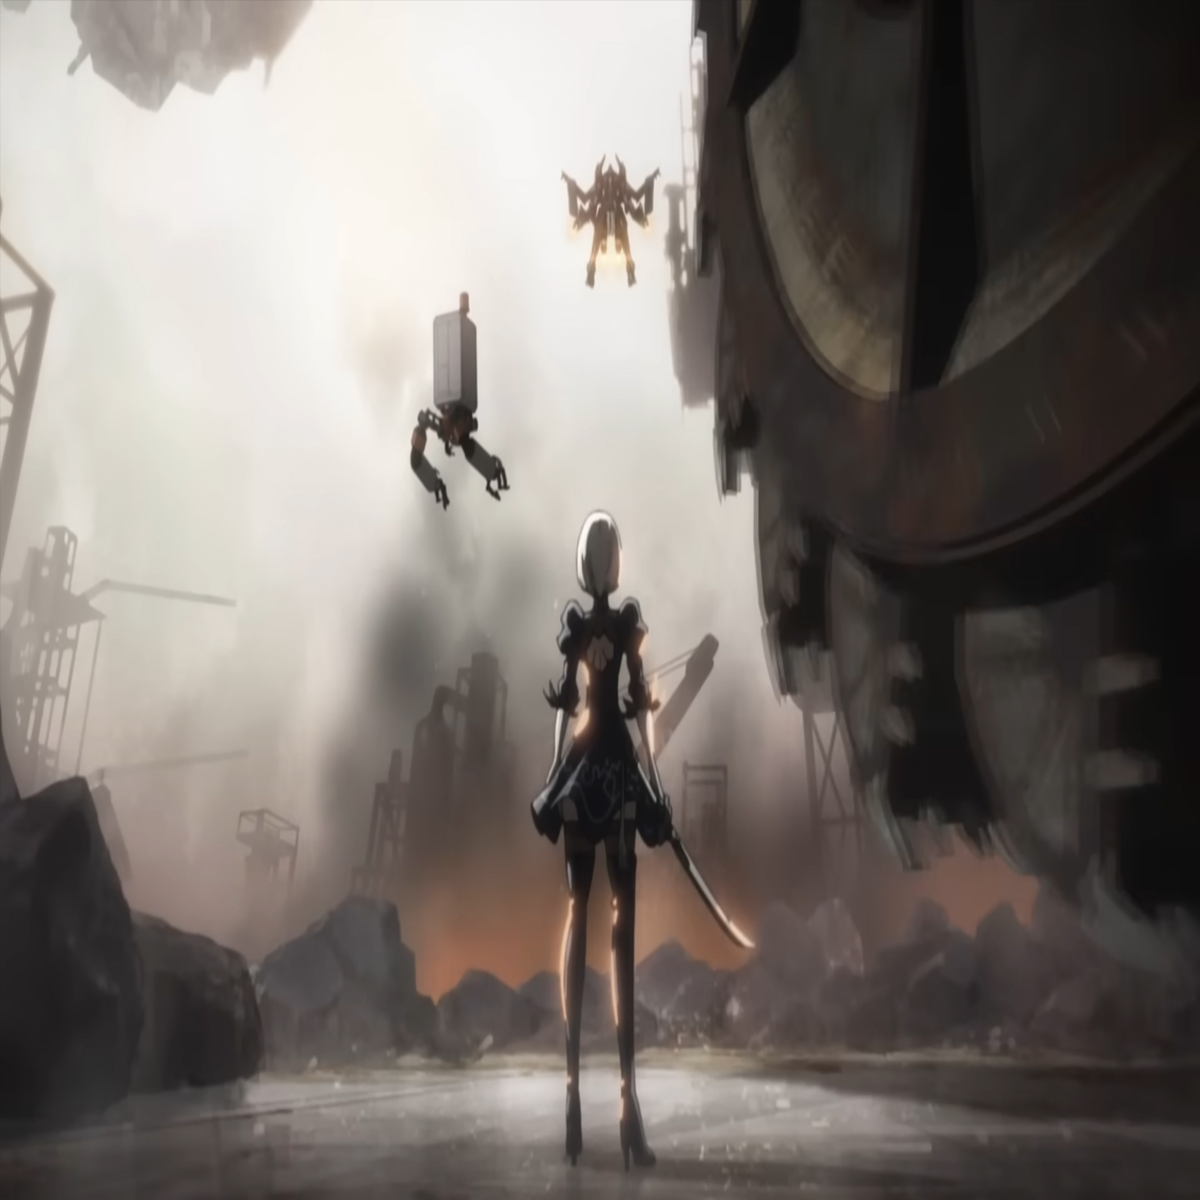 NieR:Automata anime trailer, release date, and primary cast